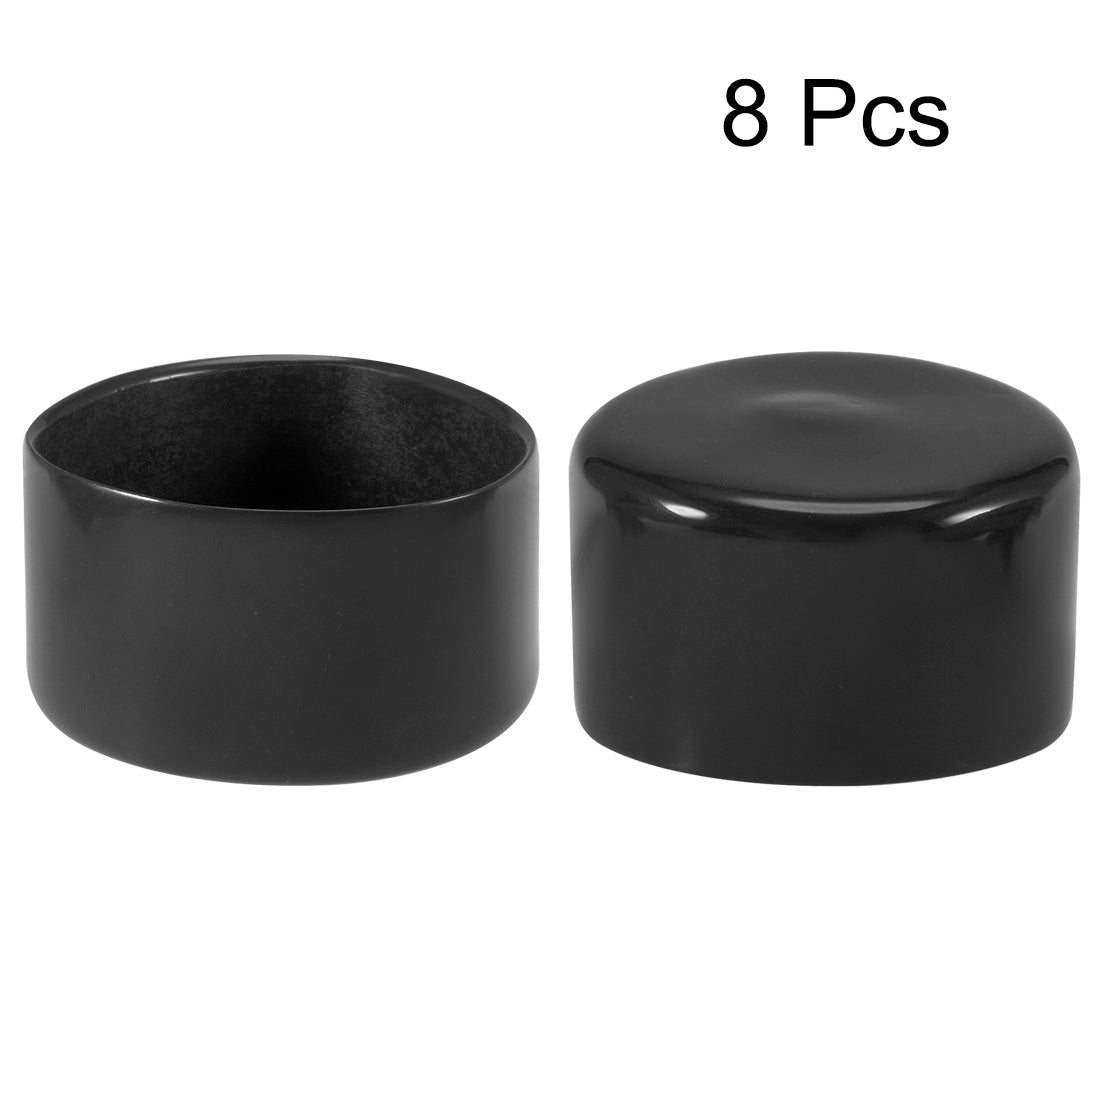 uxcell Uxcell 8pcs Rubber End Caps 55mm ID 43mm Height Screw Thread Protectors Black